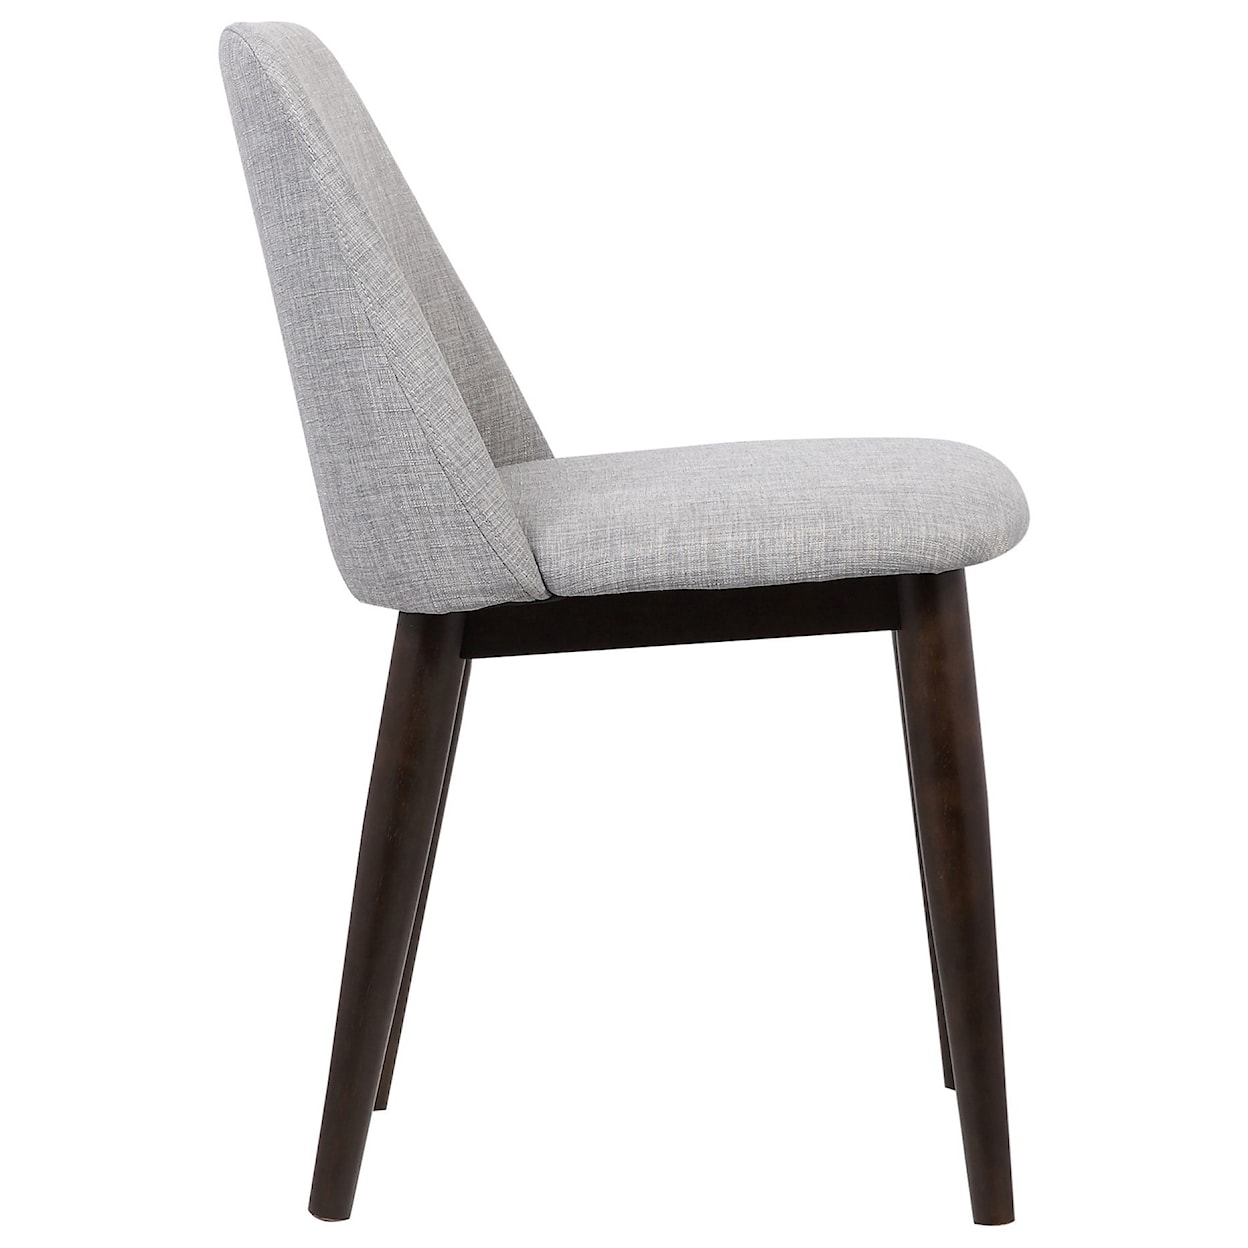 Armen Living Horizon Set of 2 Contemporary Dining Chairs